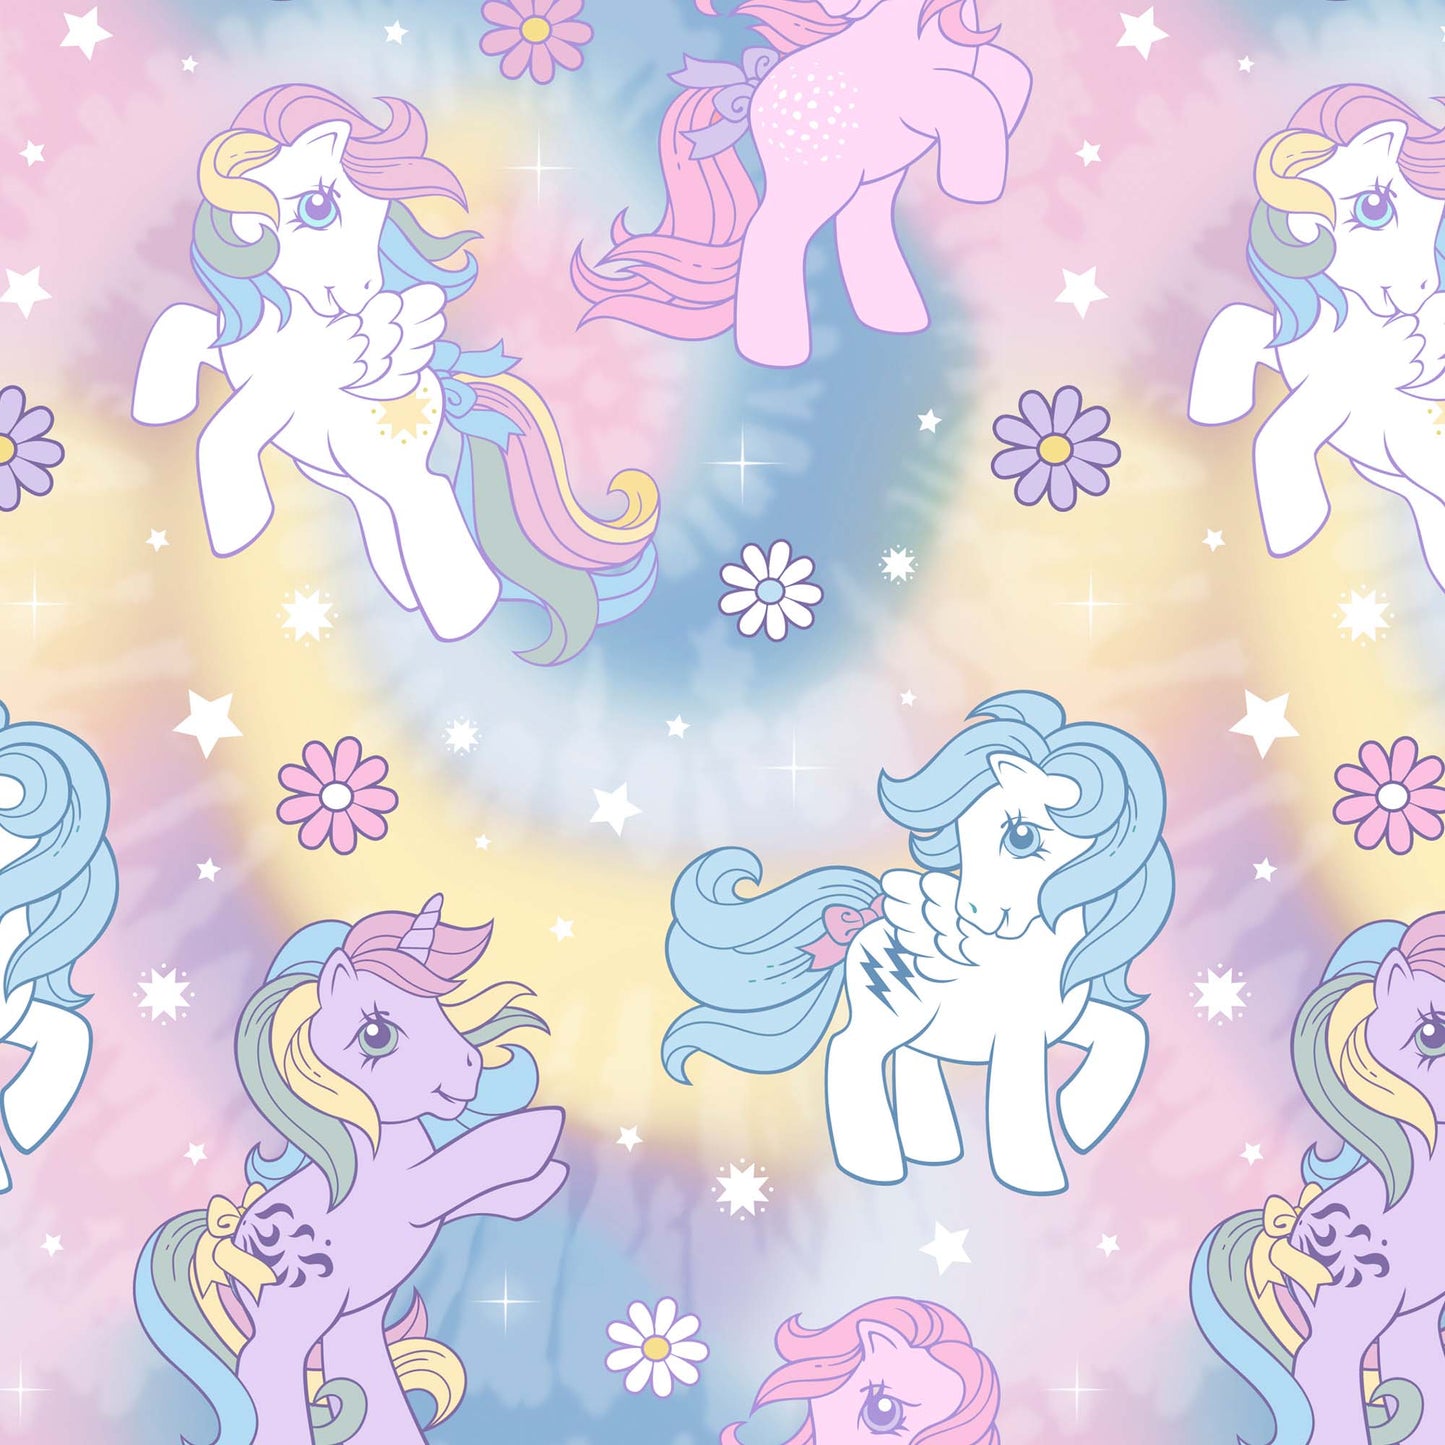 Duvet cover with buttons 100% cotton My Little Pony